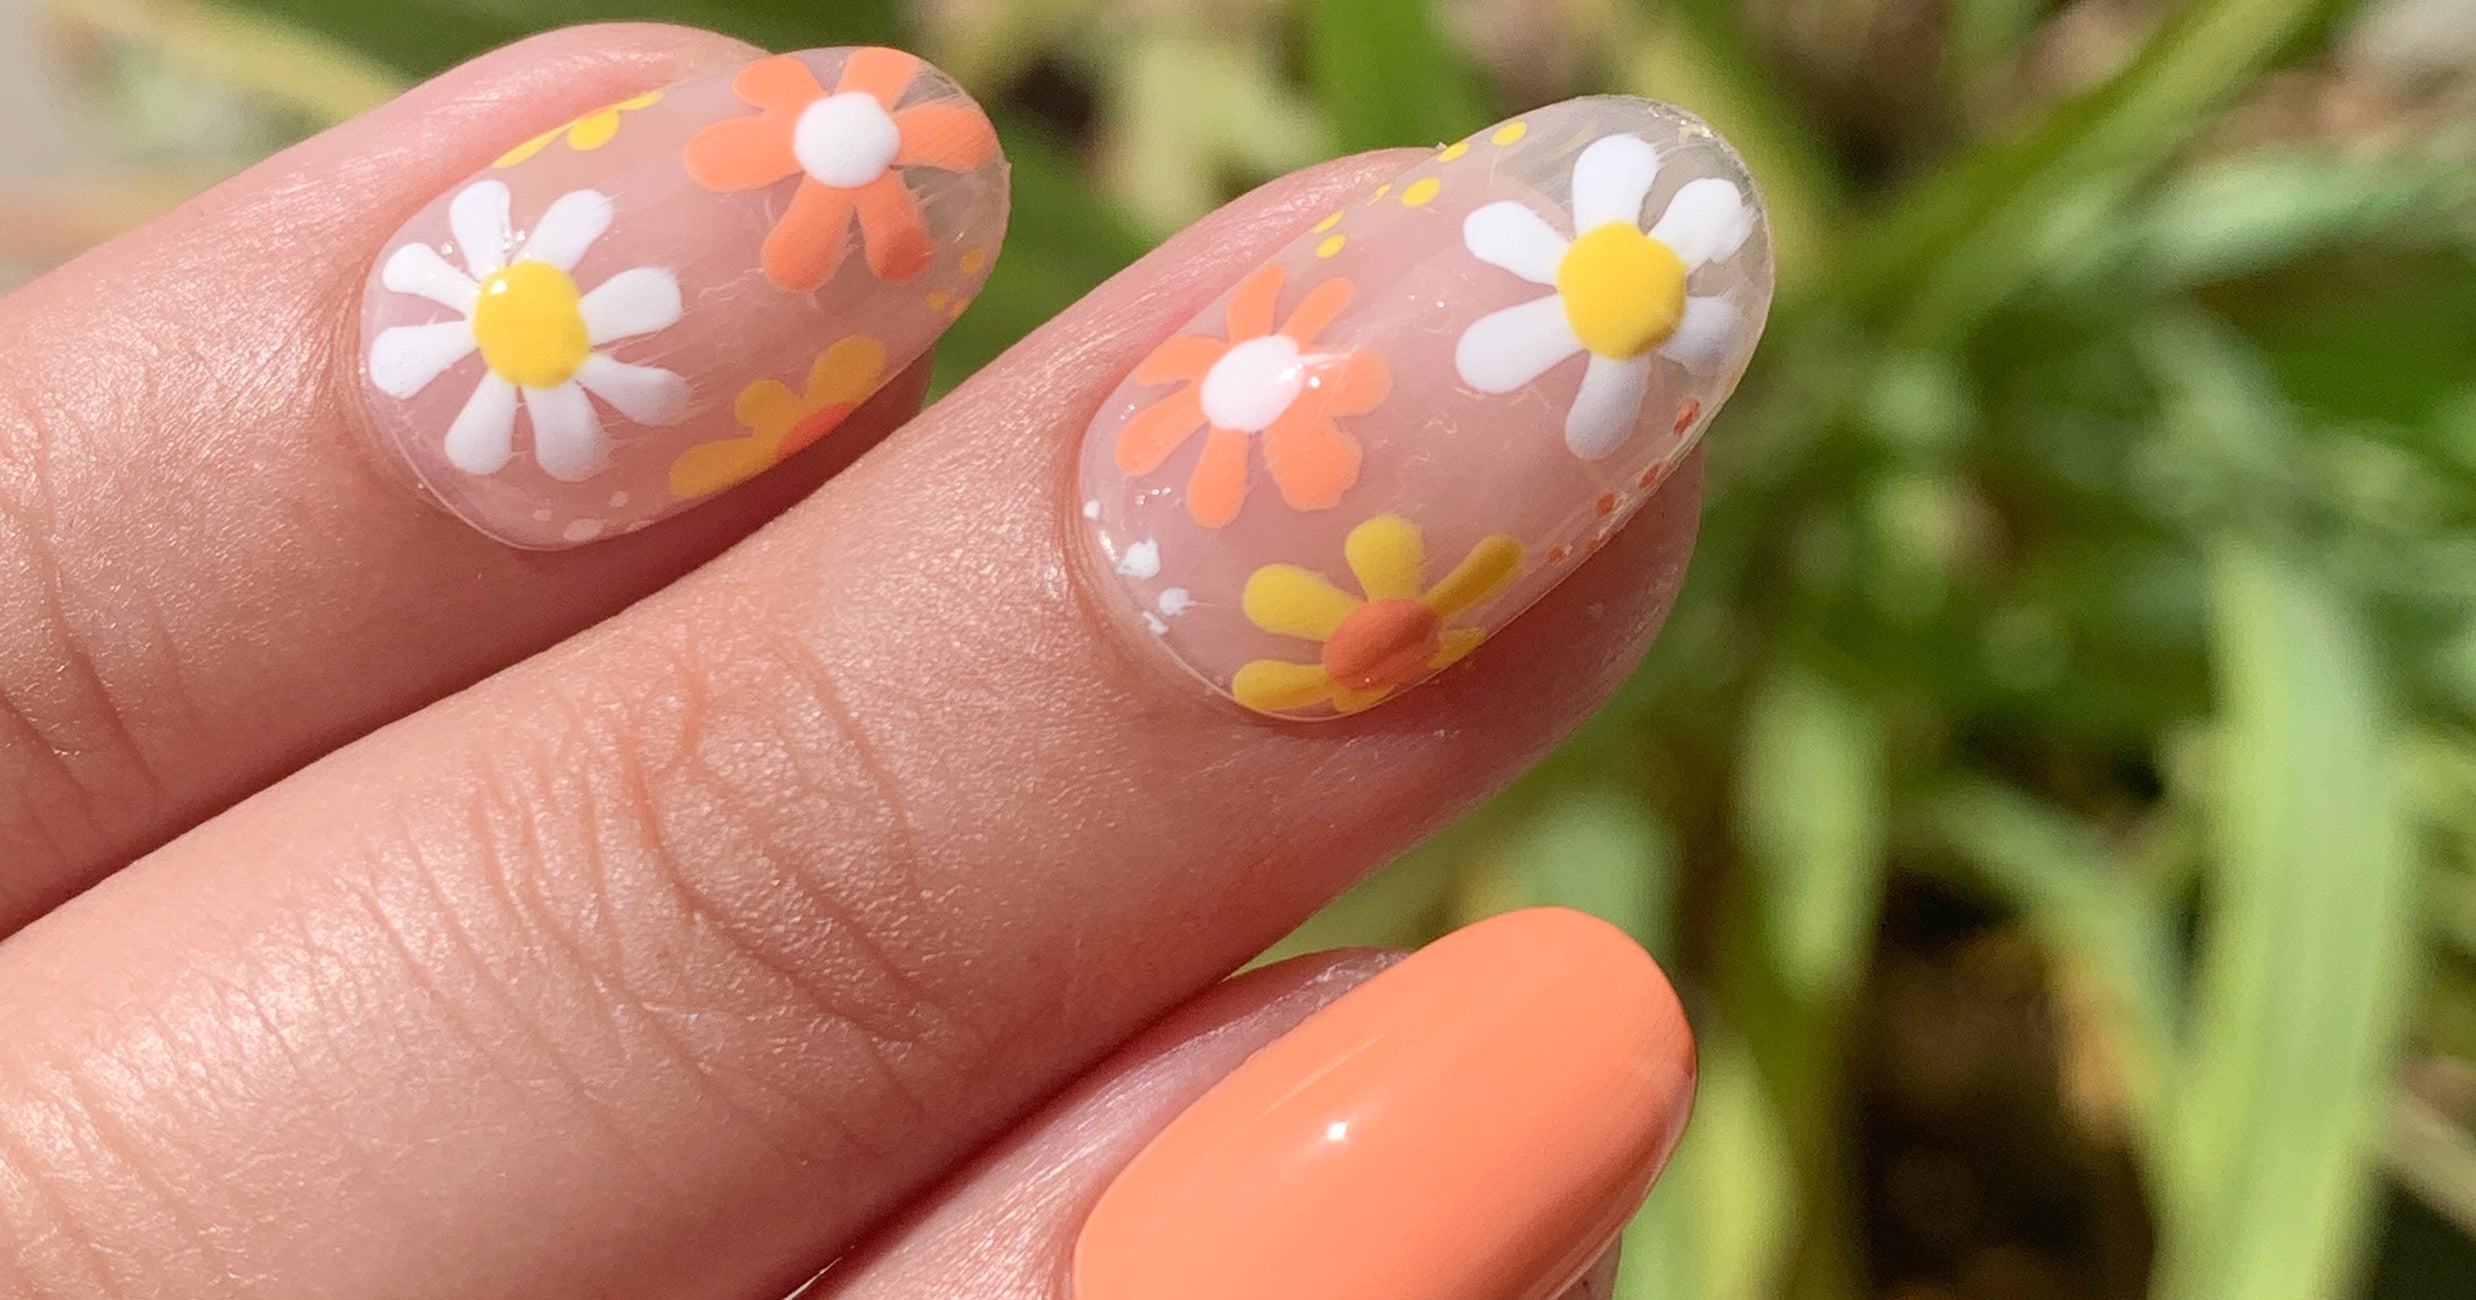 3. 20 Easy Nail Art Ideas for Short Nails - wide 1